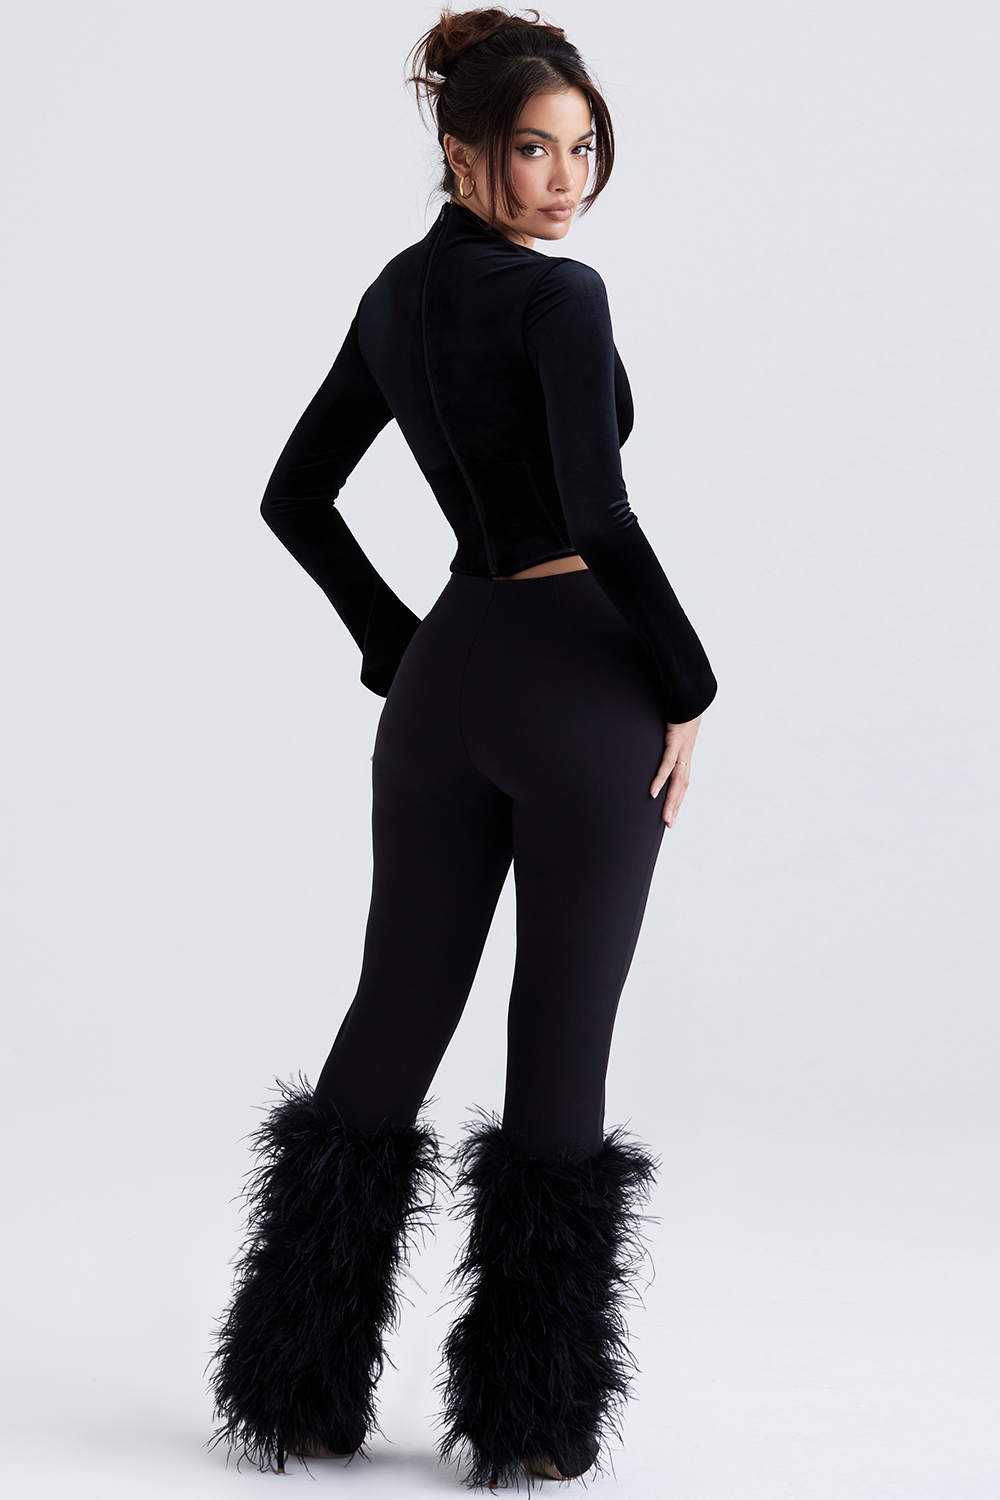 Clothing : Trousers : 'Nicolette' Black Trimmed Trousers